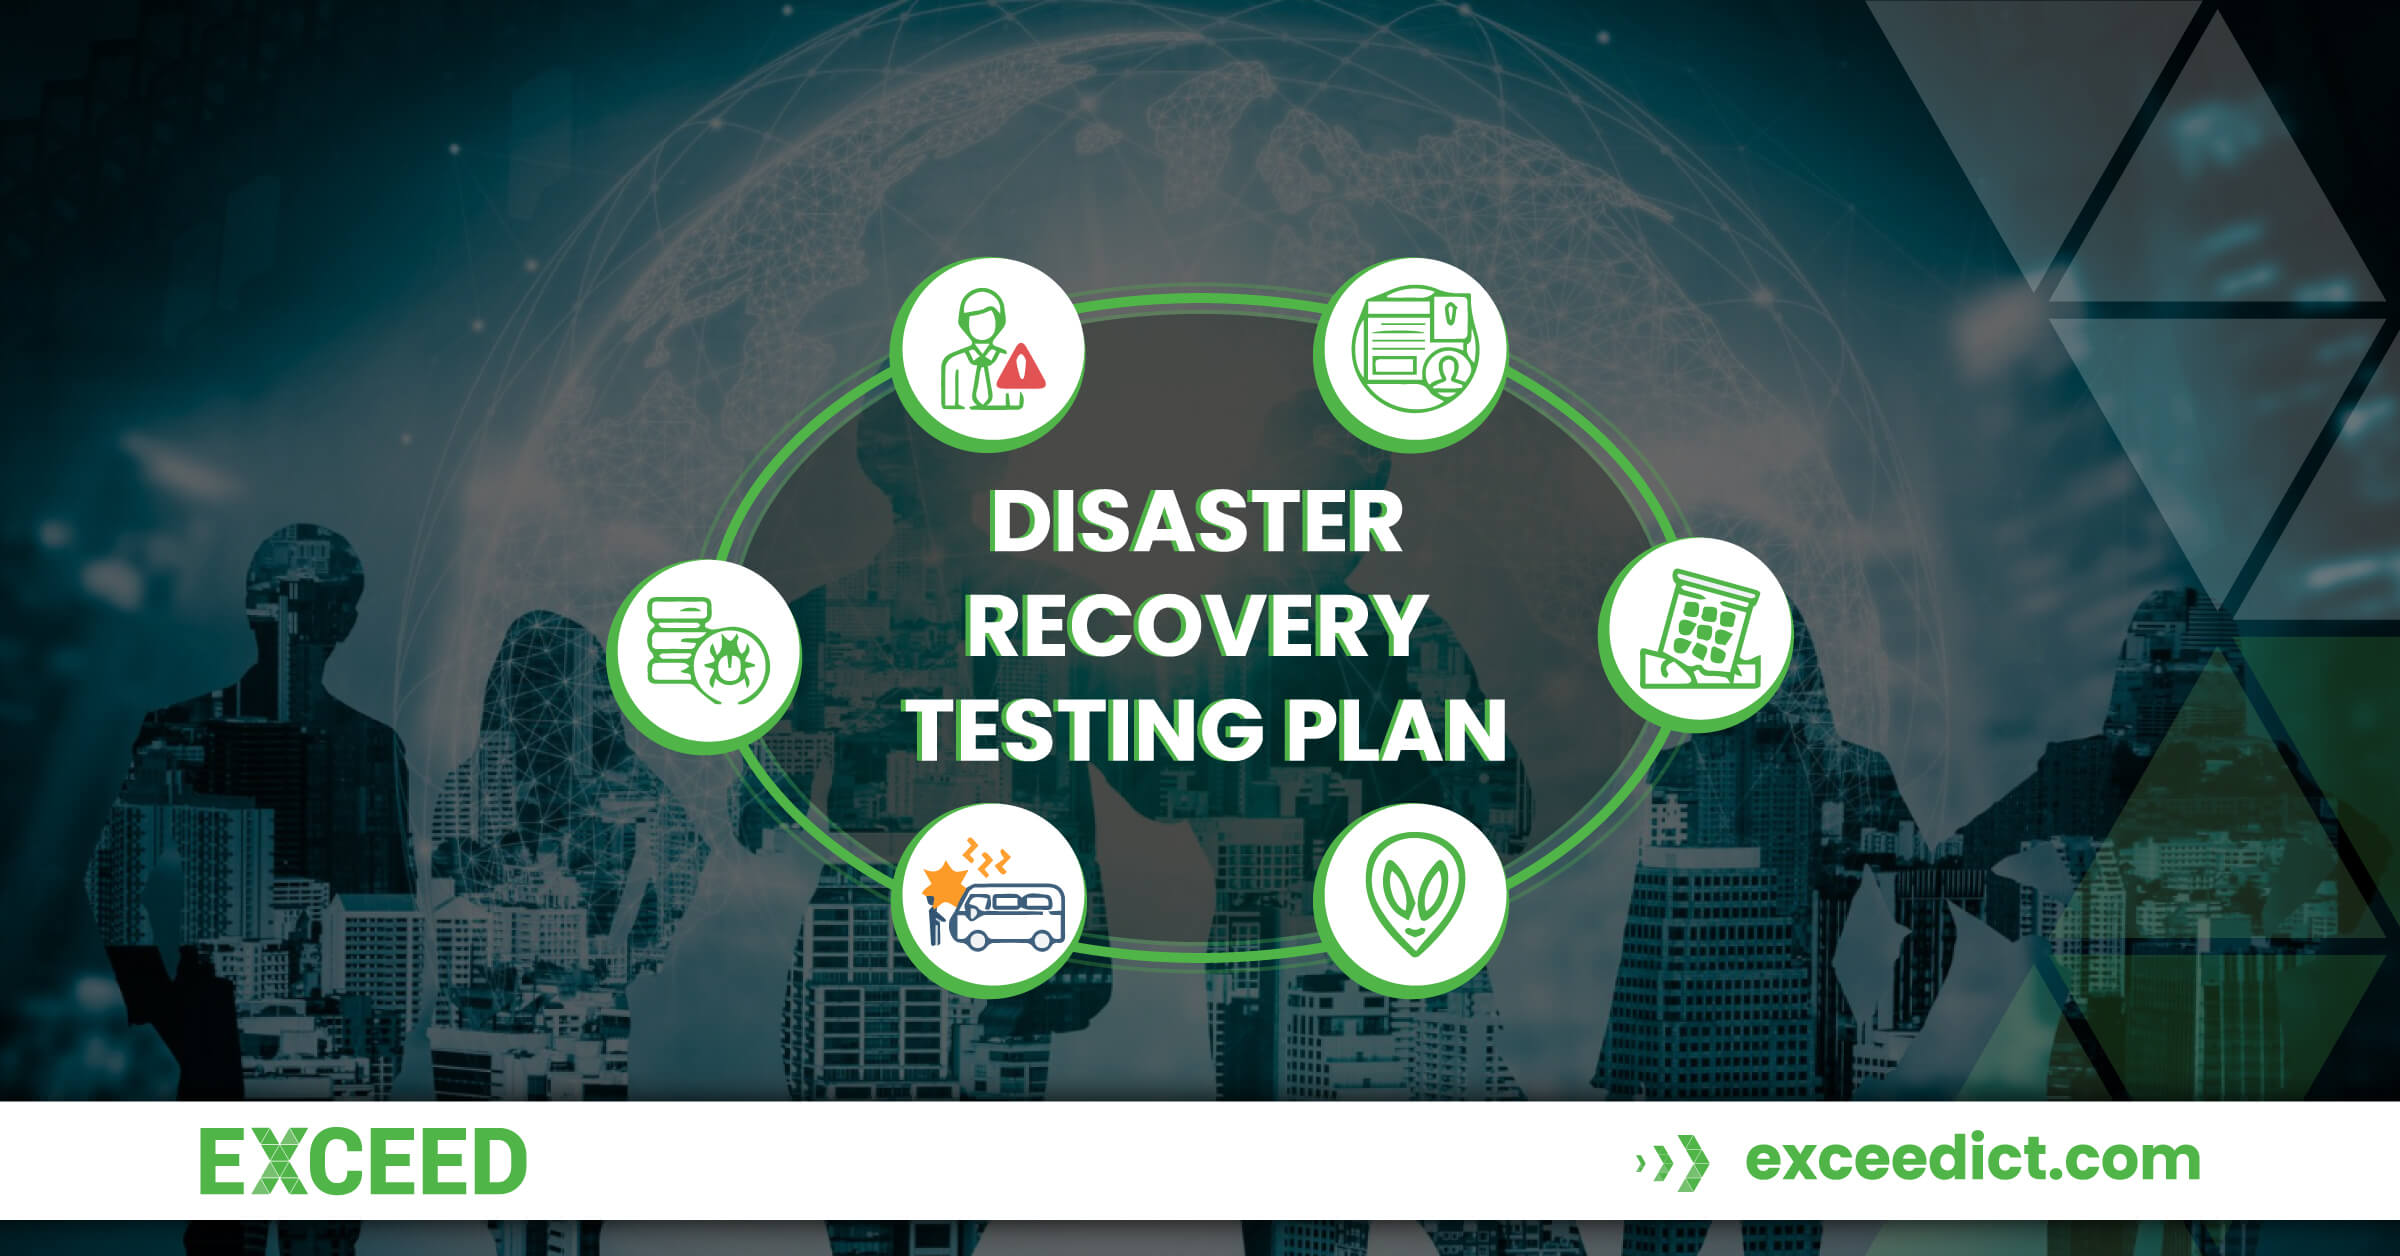 What to include in a disaster recovery testing plan?